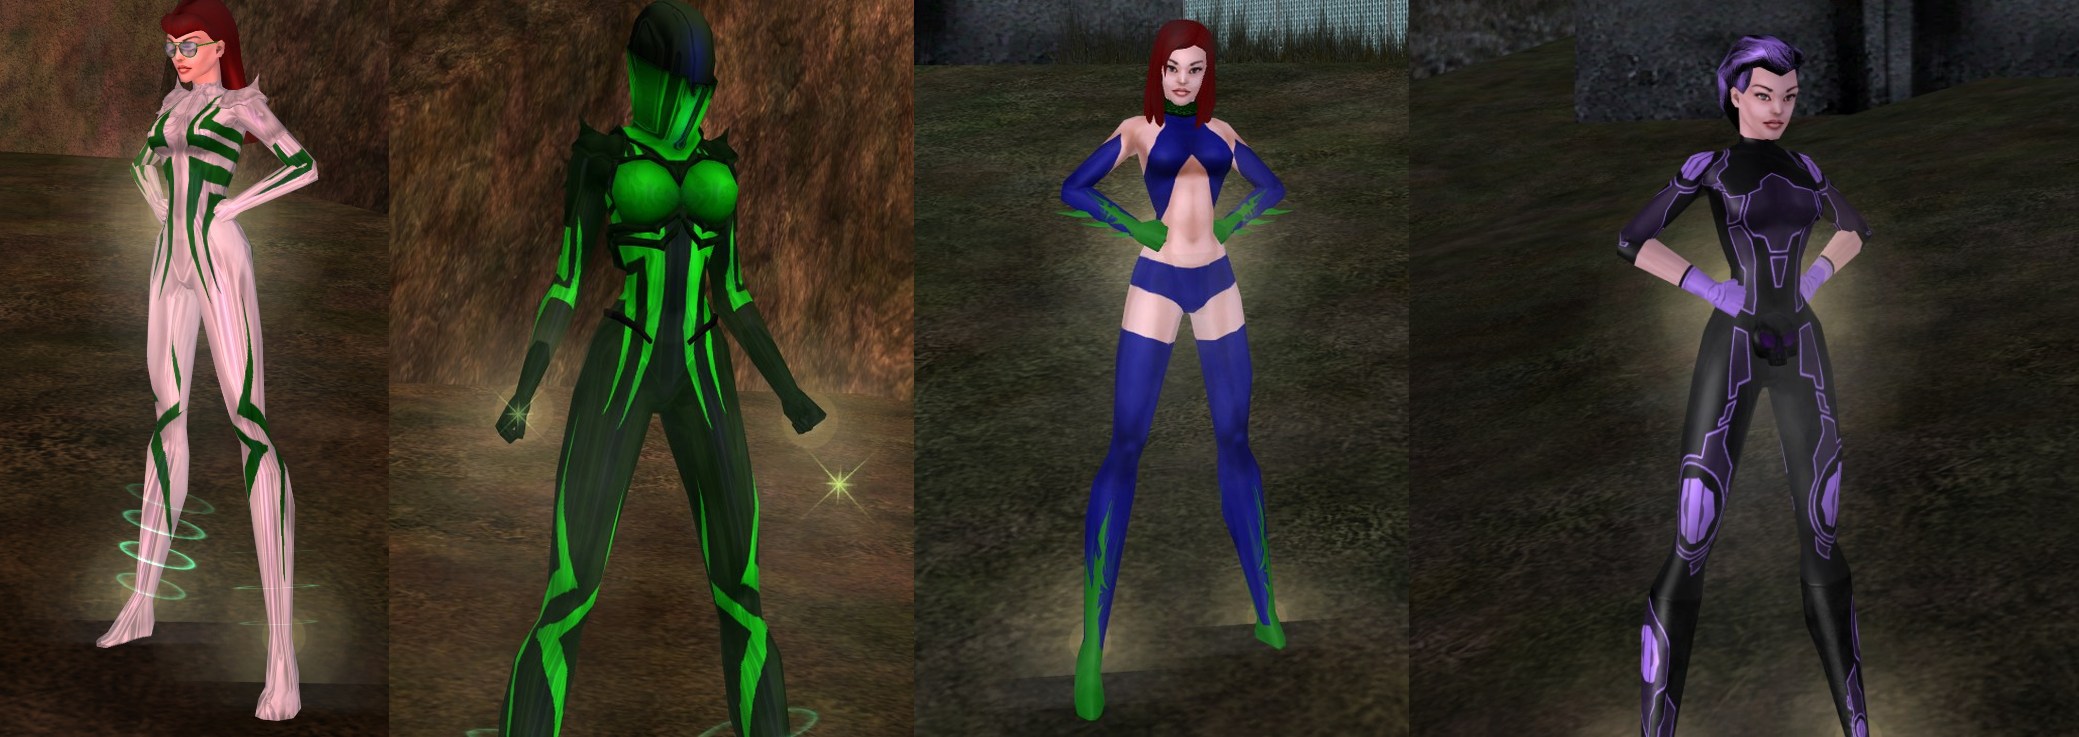 GamerCityNews HiGqCnzTeUgrrsSekqZAmf How much time do you spend on MMO character fashion? 